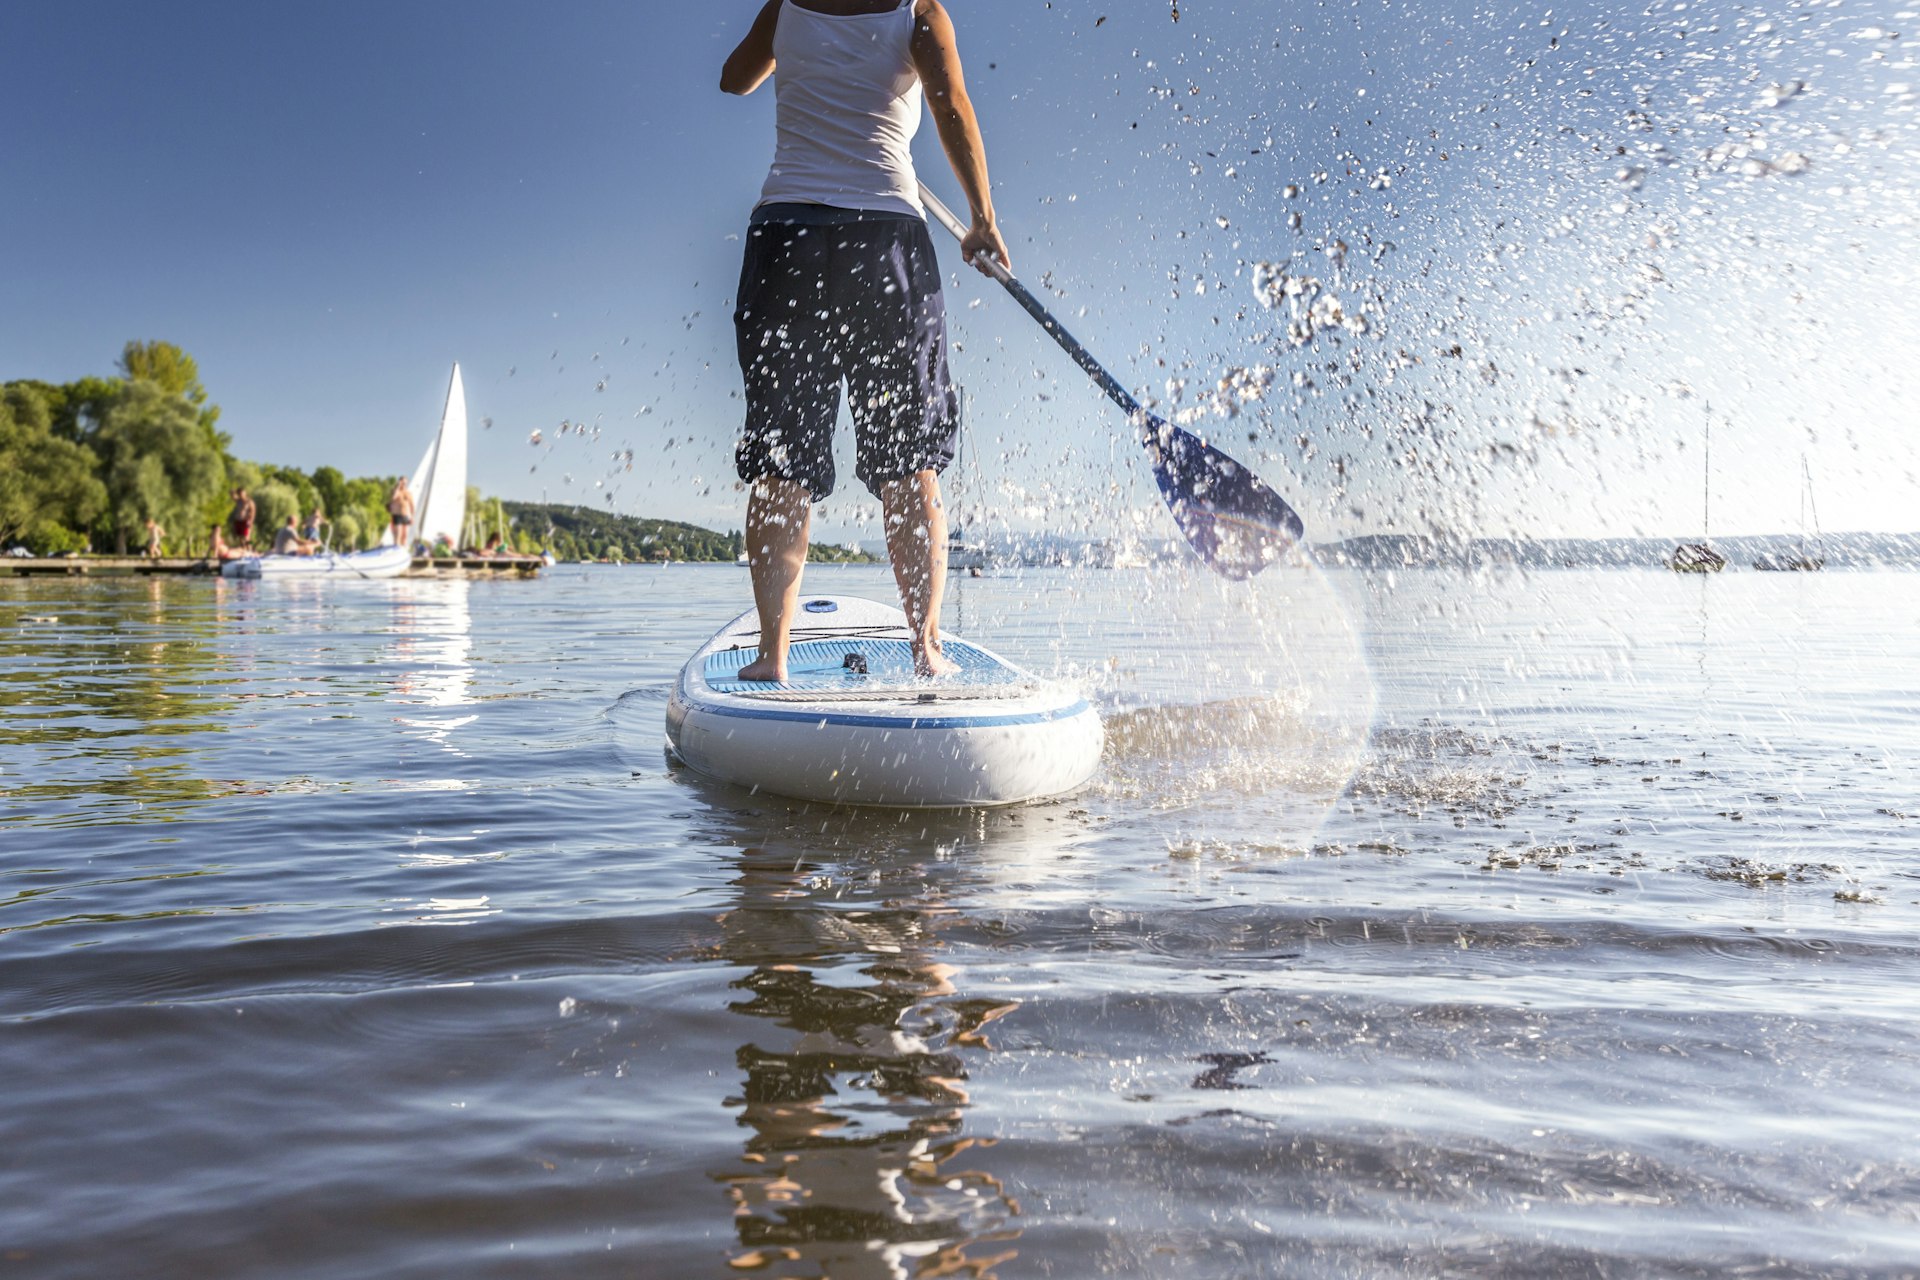 A rear shot of a person on a stand-up paddleboard on a lake